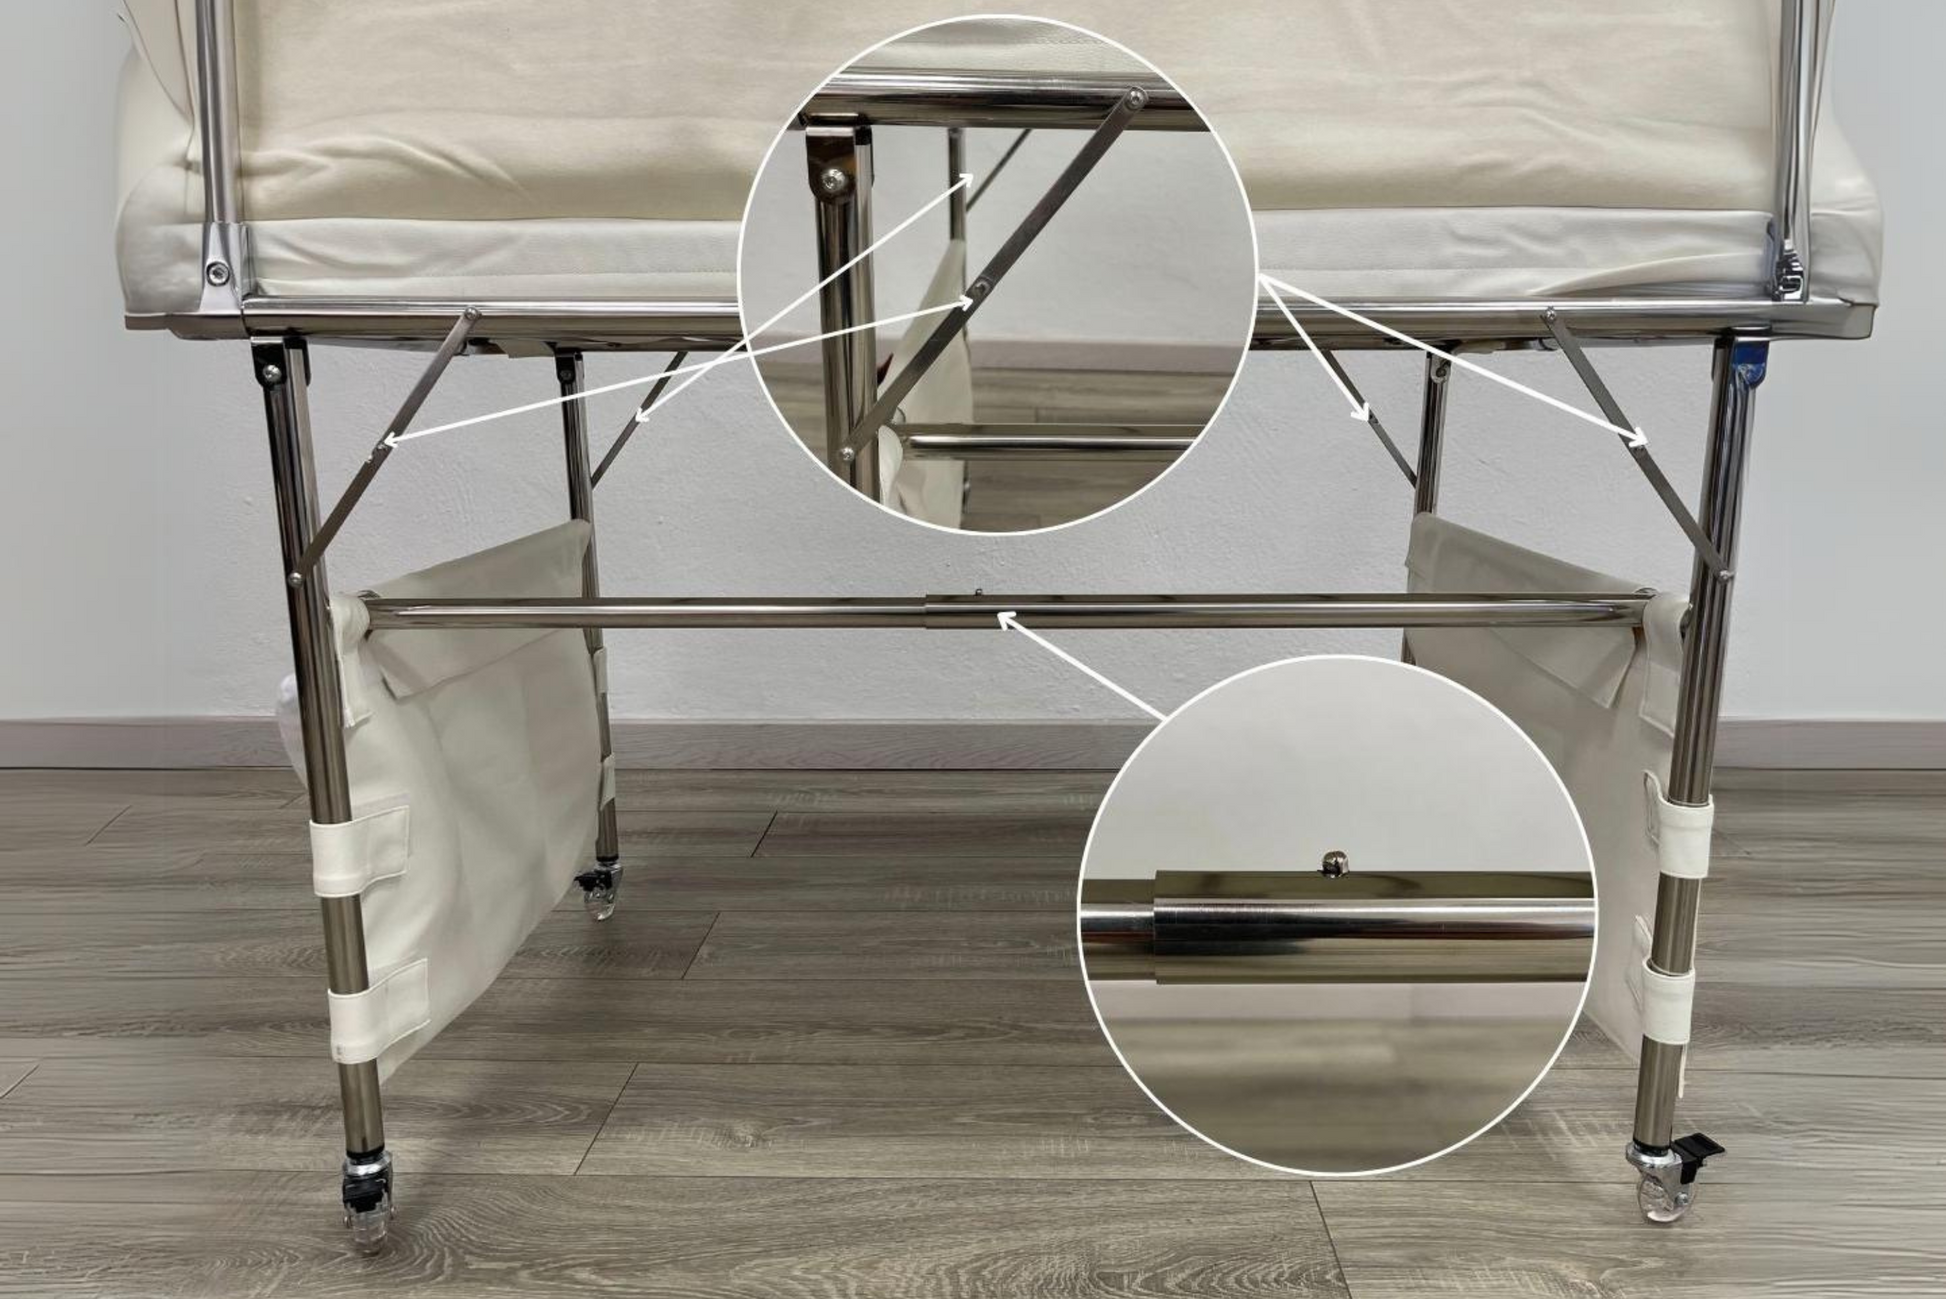 The Easy Table represents the next generation of backdrop stands for newborn photography, featuring tool-free assembly, a built-in safety bar, and secure positioning with a single click.